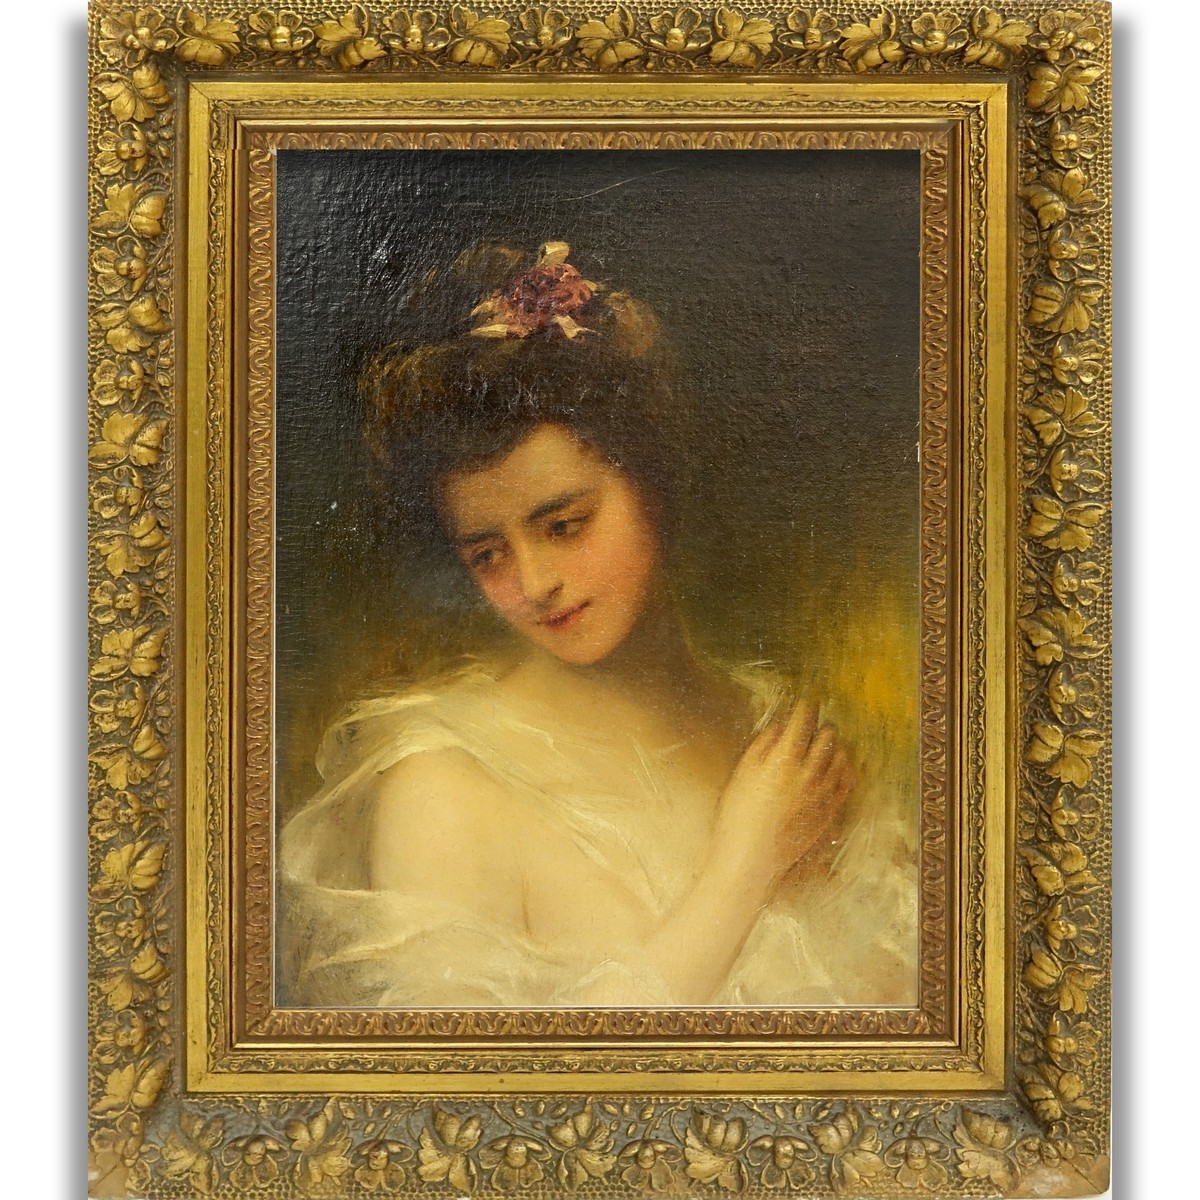 Antique Oil on Canvas Laid on Cardboard, Portrait of a Young Girl, Lower Right. Heavy craquelure to surface, yellowing to varnish.